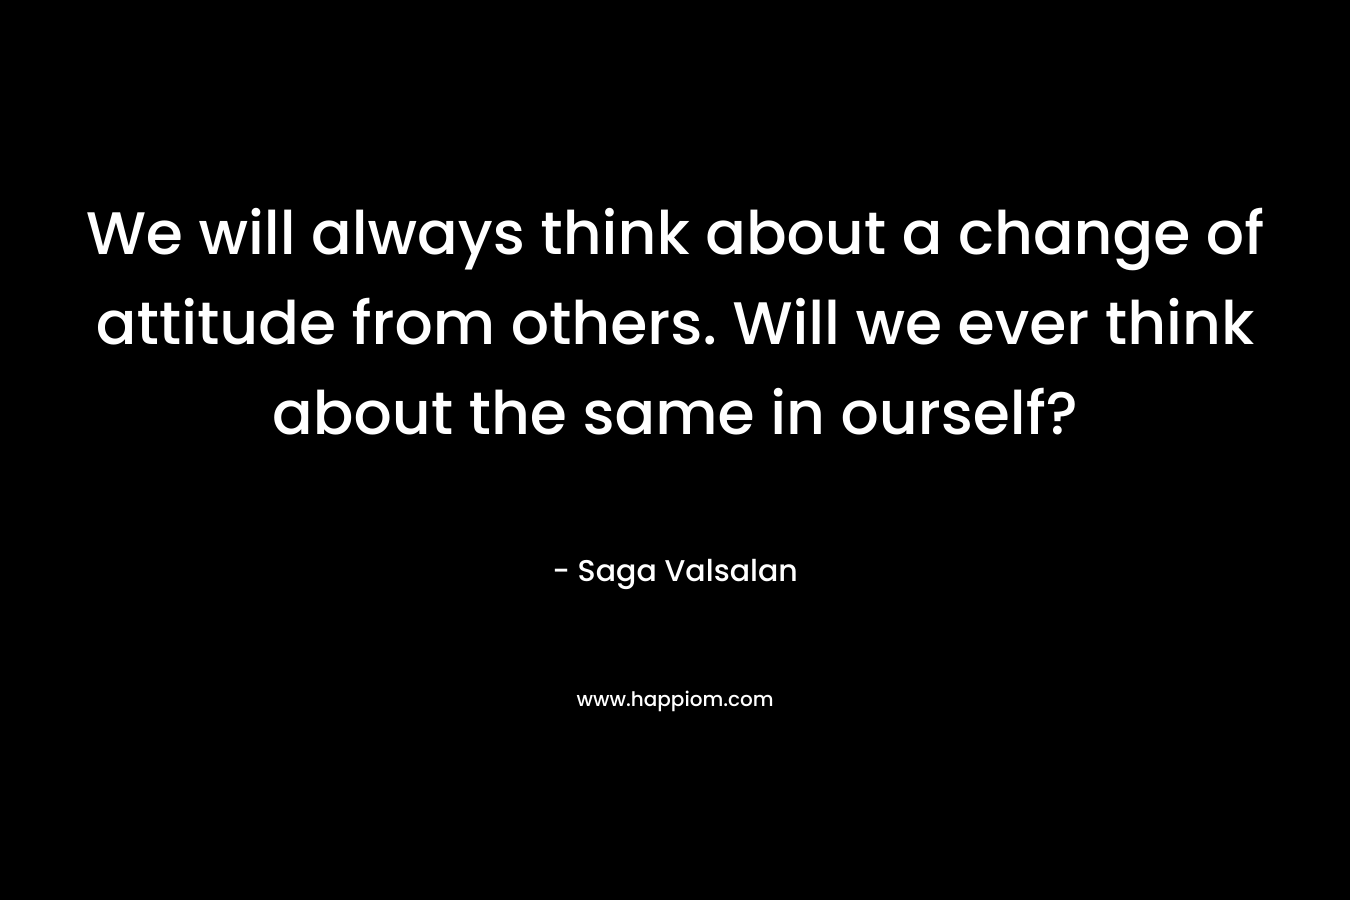 We will always think about a change of attitude from others. Will we ever think about the same in ourself?